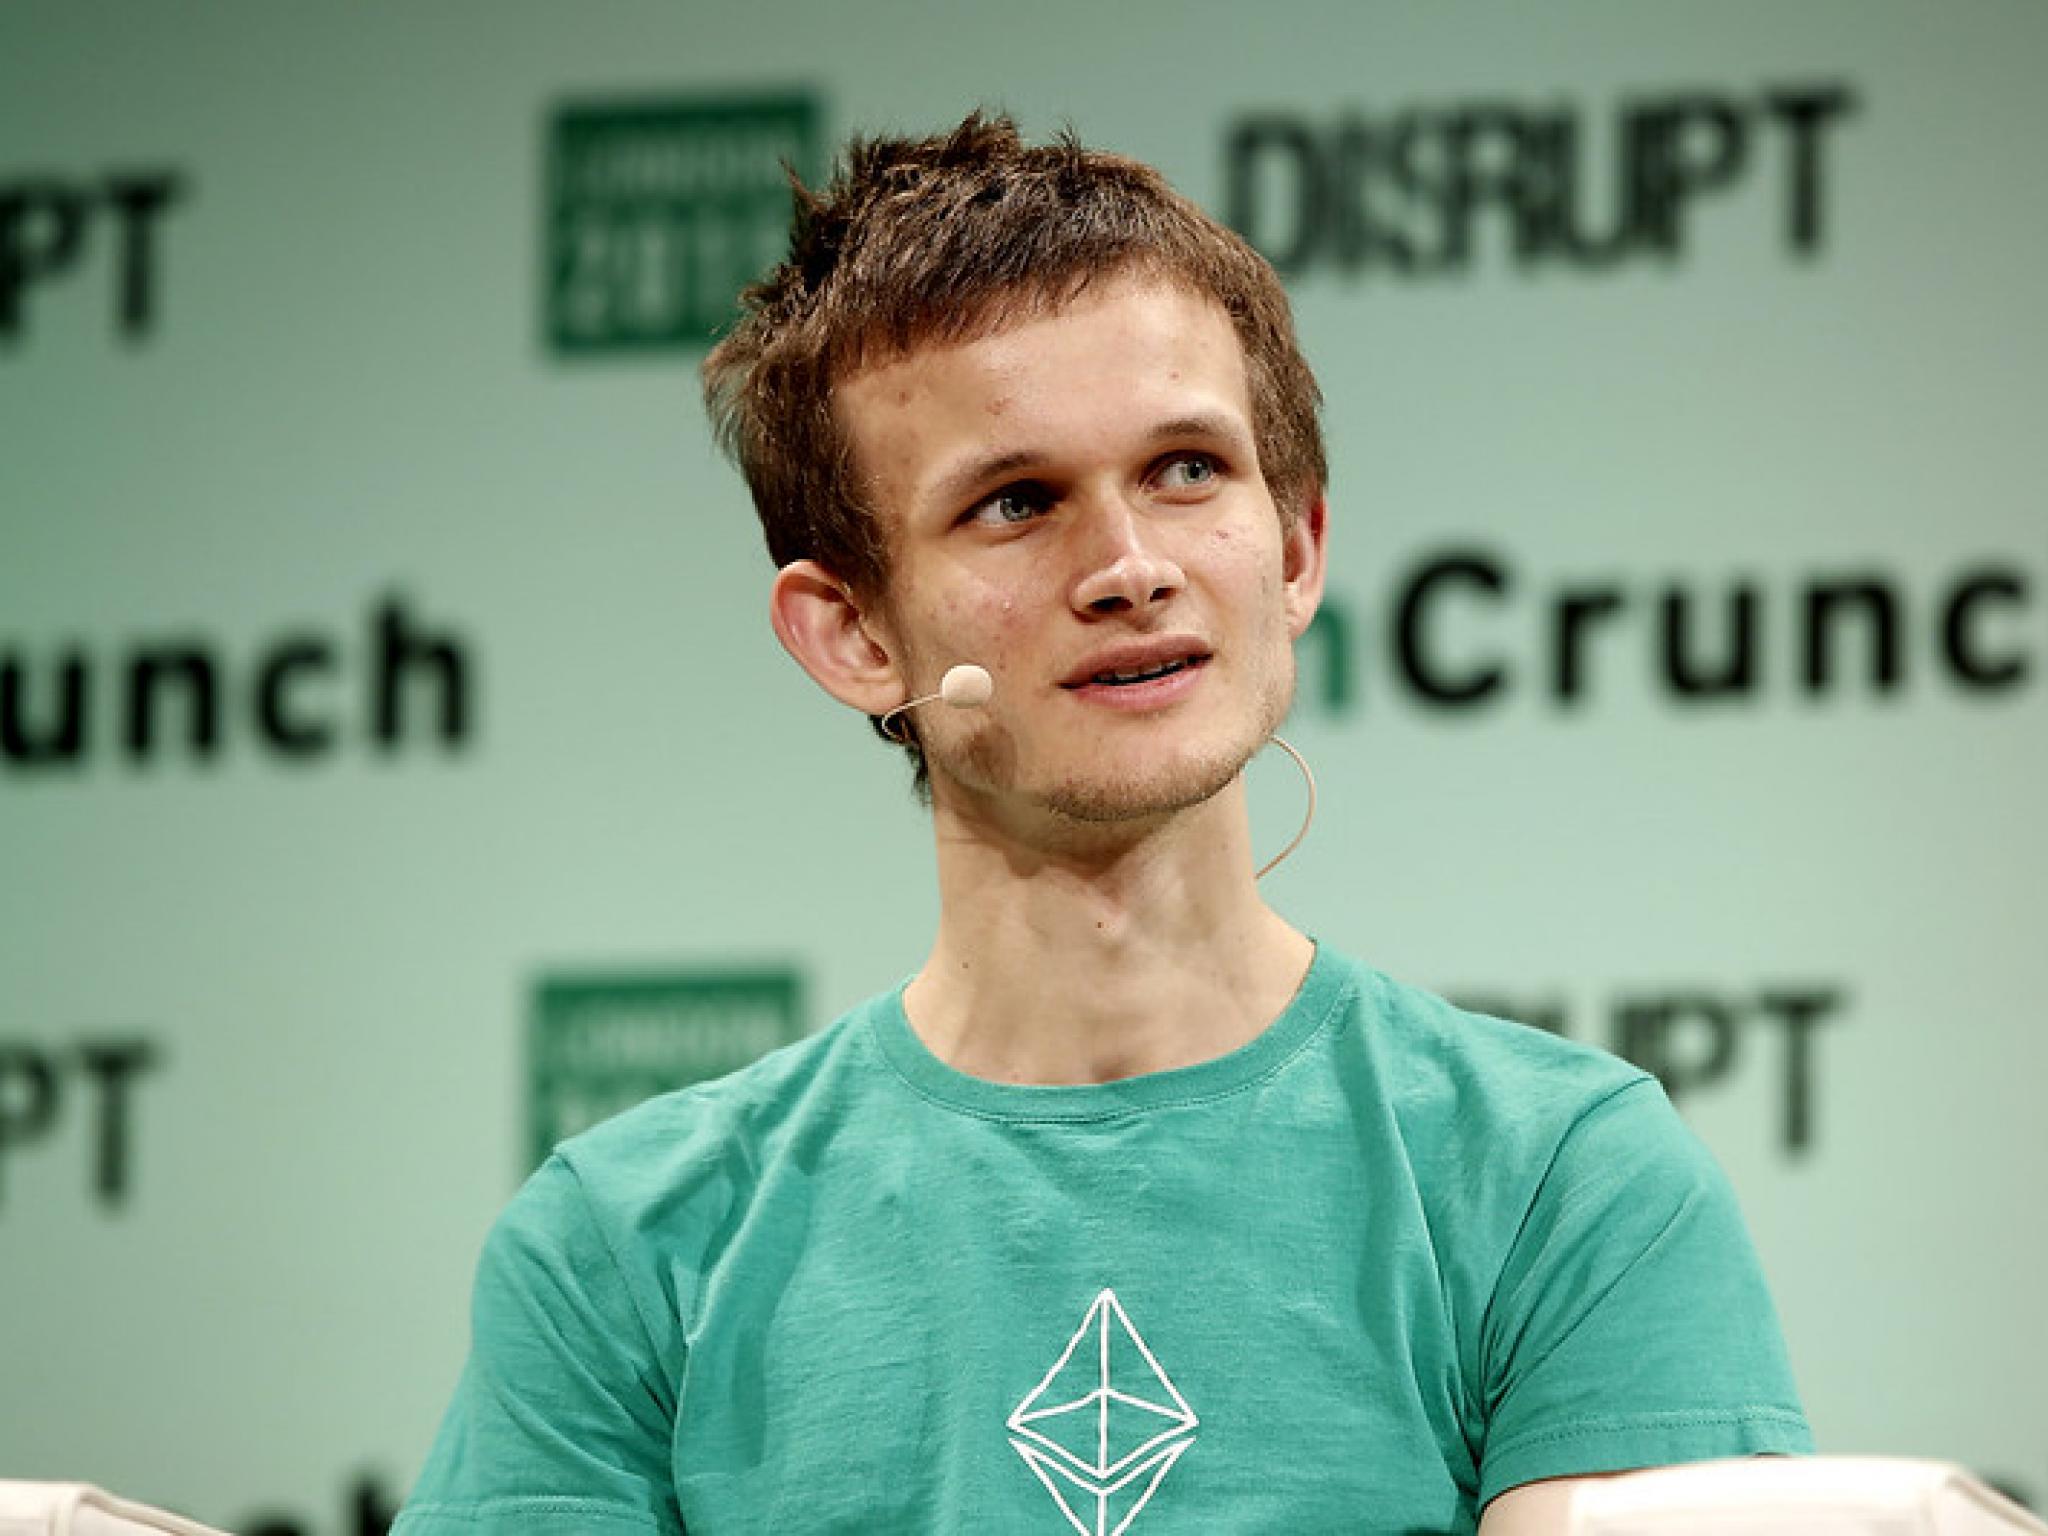  ethereum-co-founder-vitalik-buterin-offers-solution-to-elon-musks-microsoft-woes-join-us-and-become-a-desktop-linux-enjoyer 